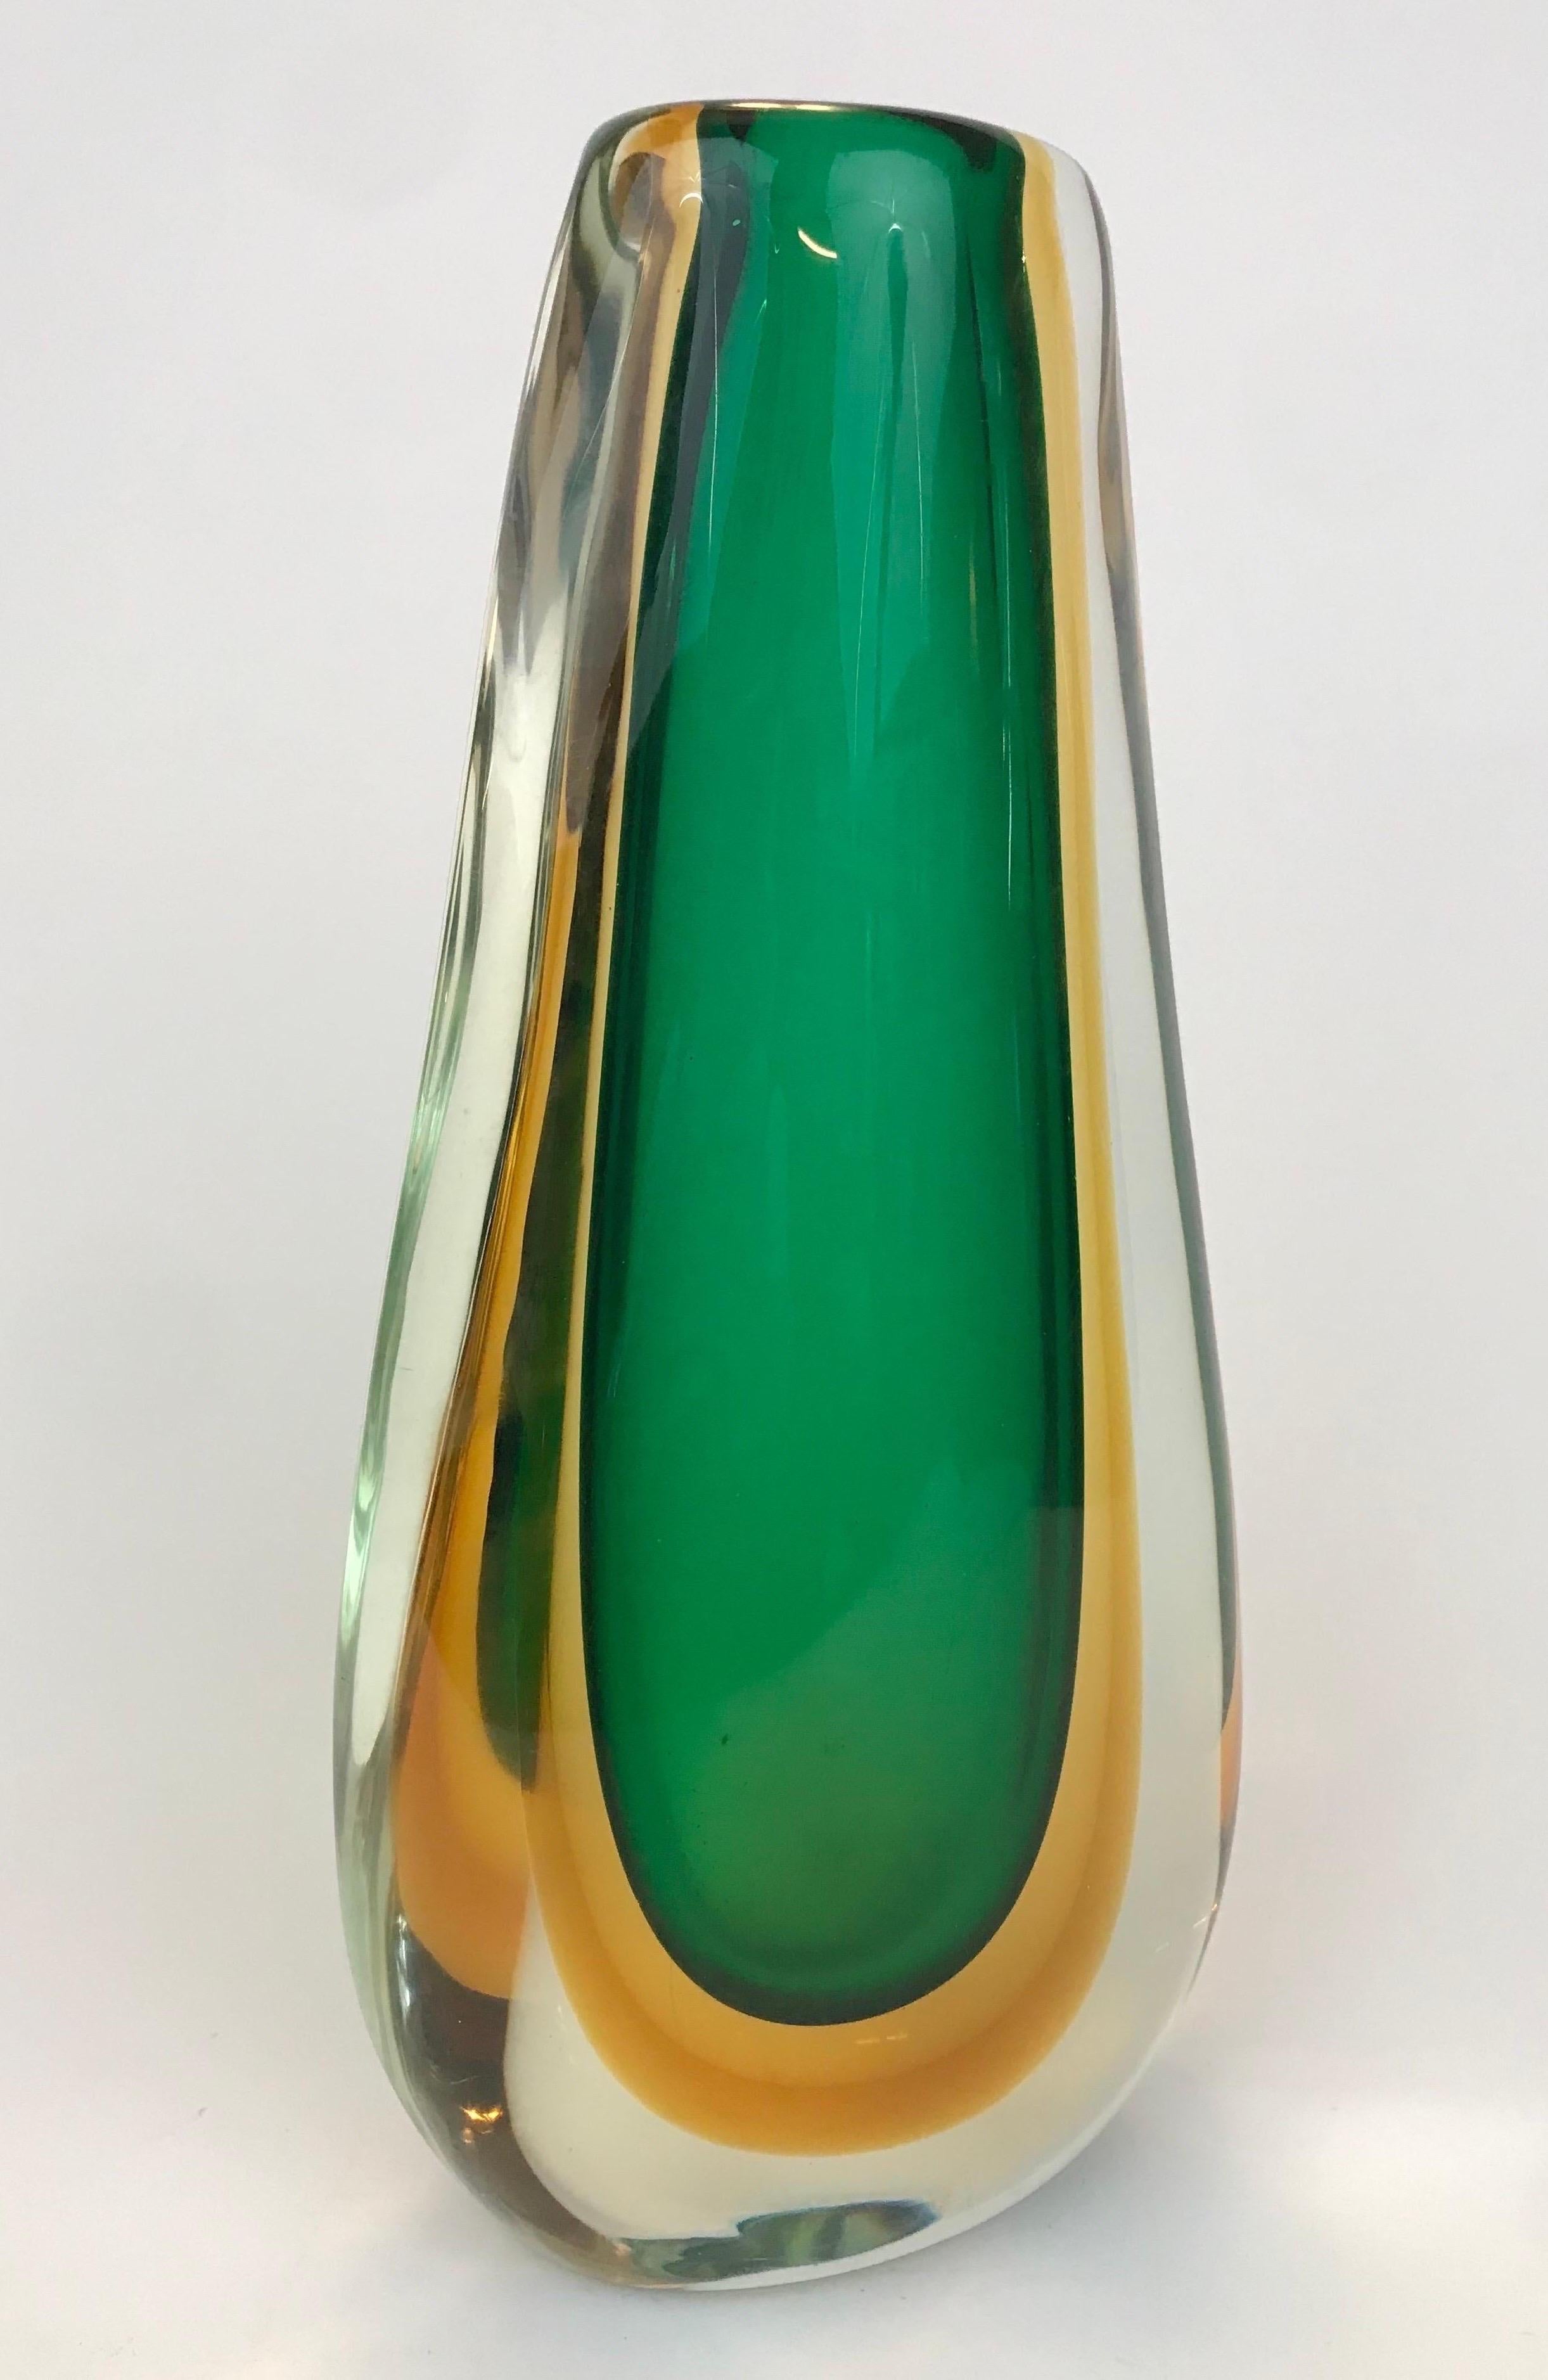 Tall Flavio Poli Sommerso Technique Vase in Clear, Amber and Green Glass In Good Condition For Sale In Fort mill, SC